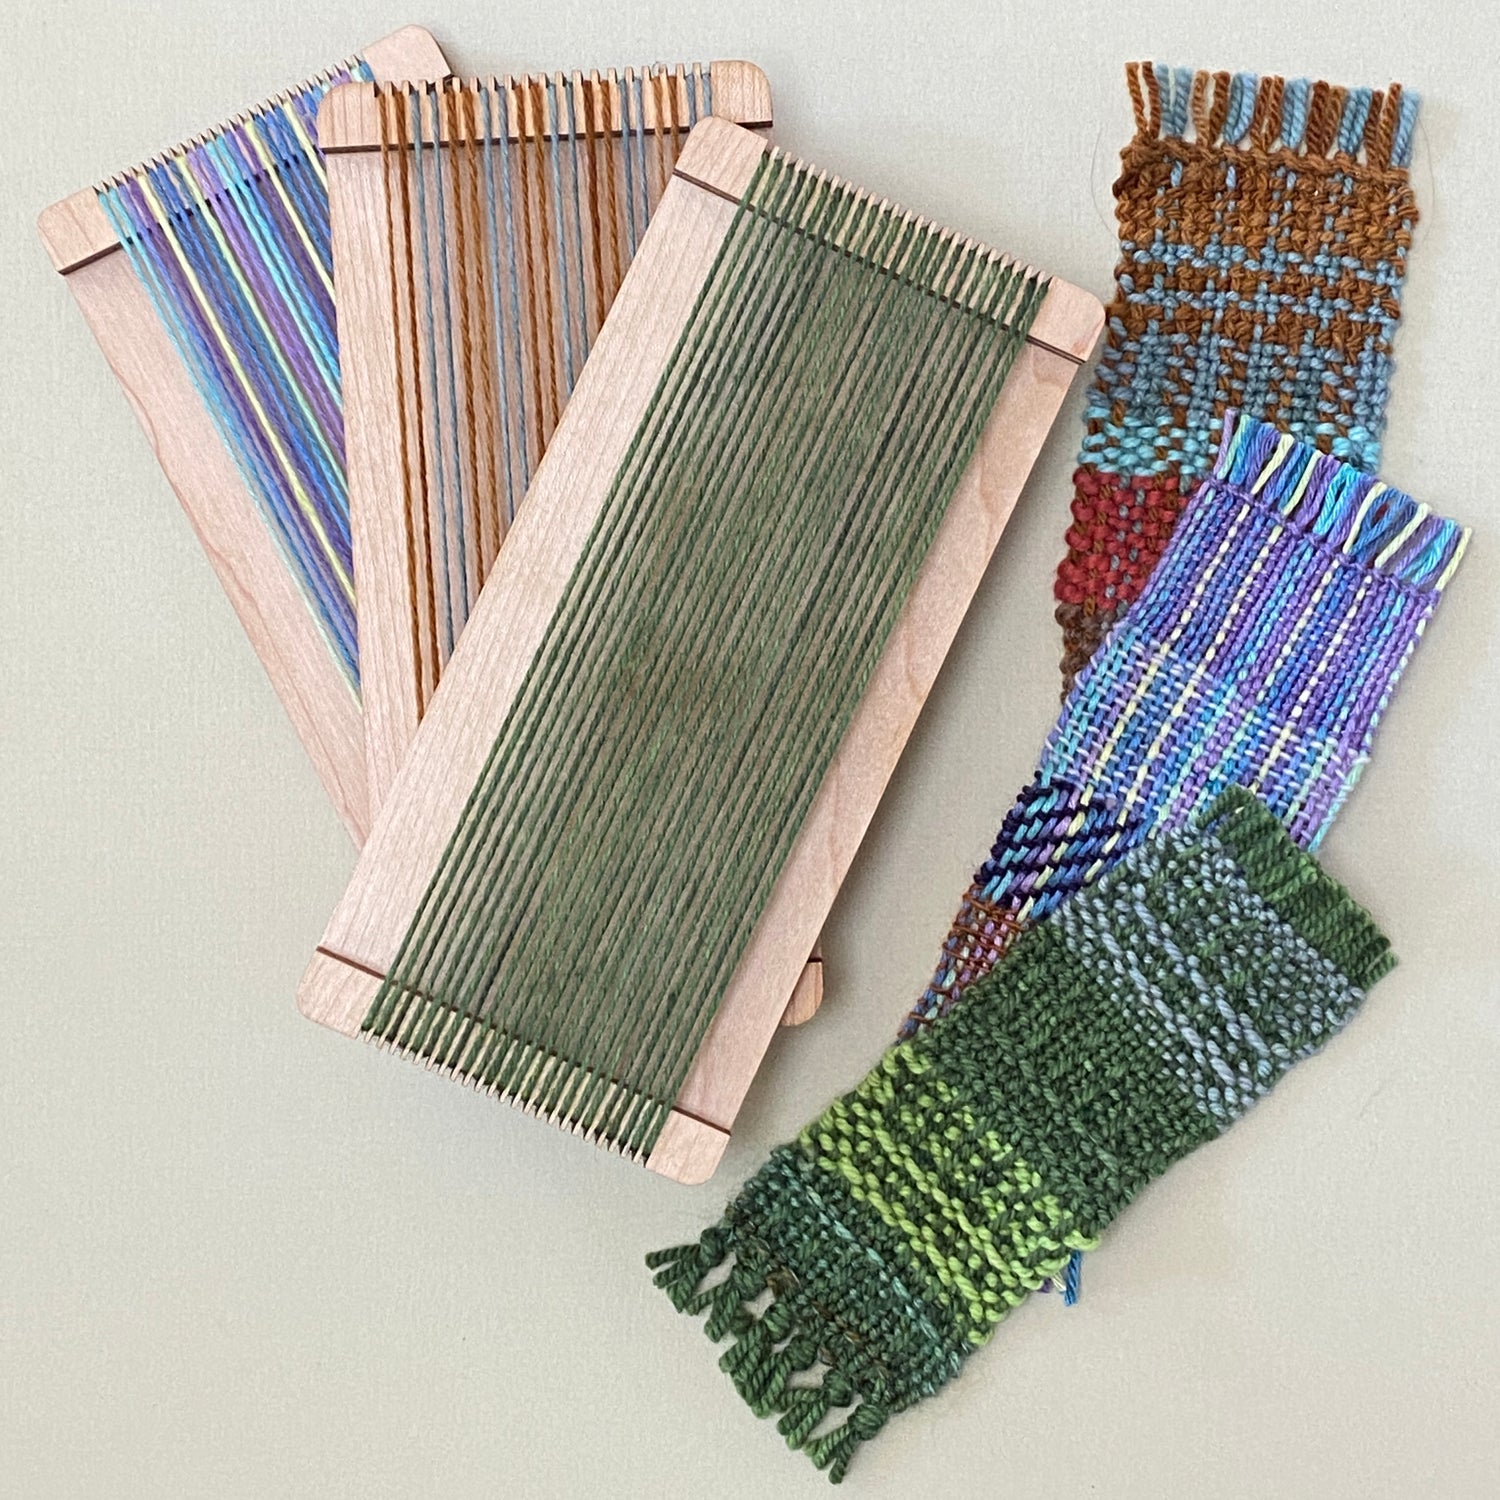 Size 8, 10, and 12 mini looms with different warps and three swatches made from those warps in various colors and structures.